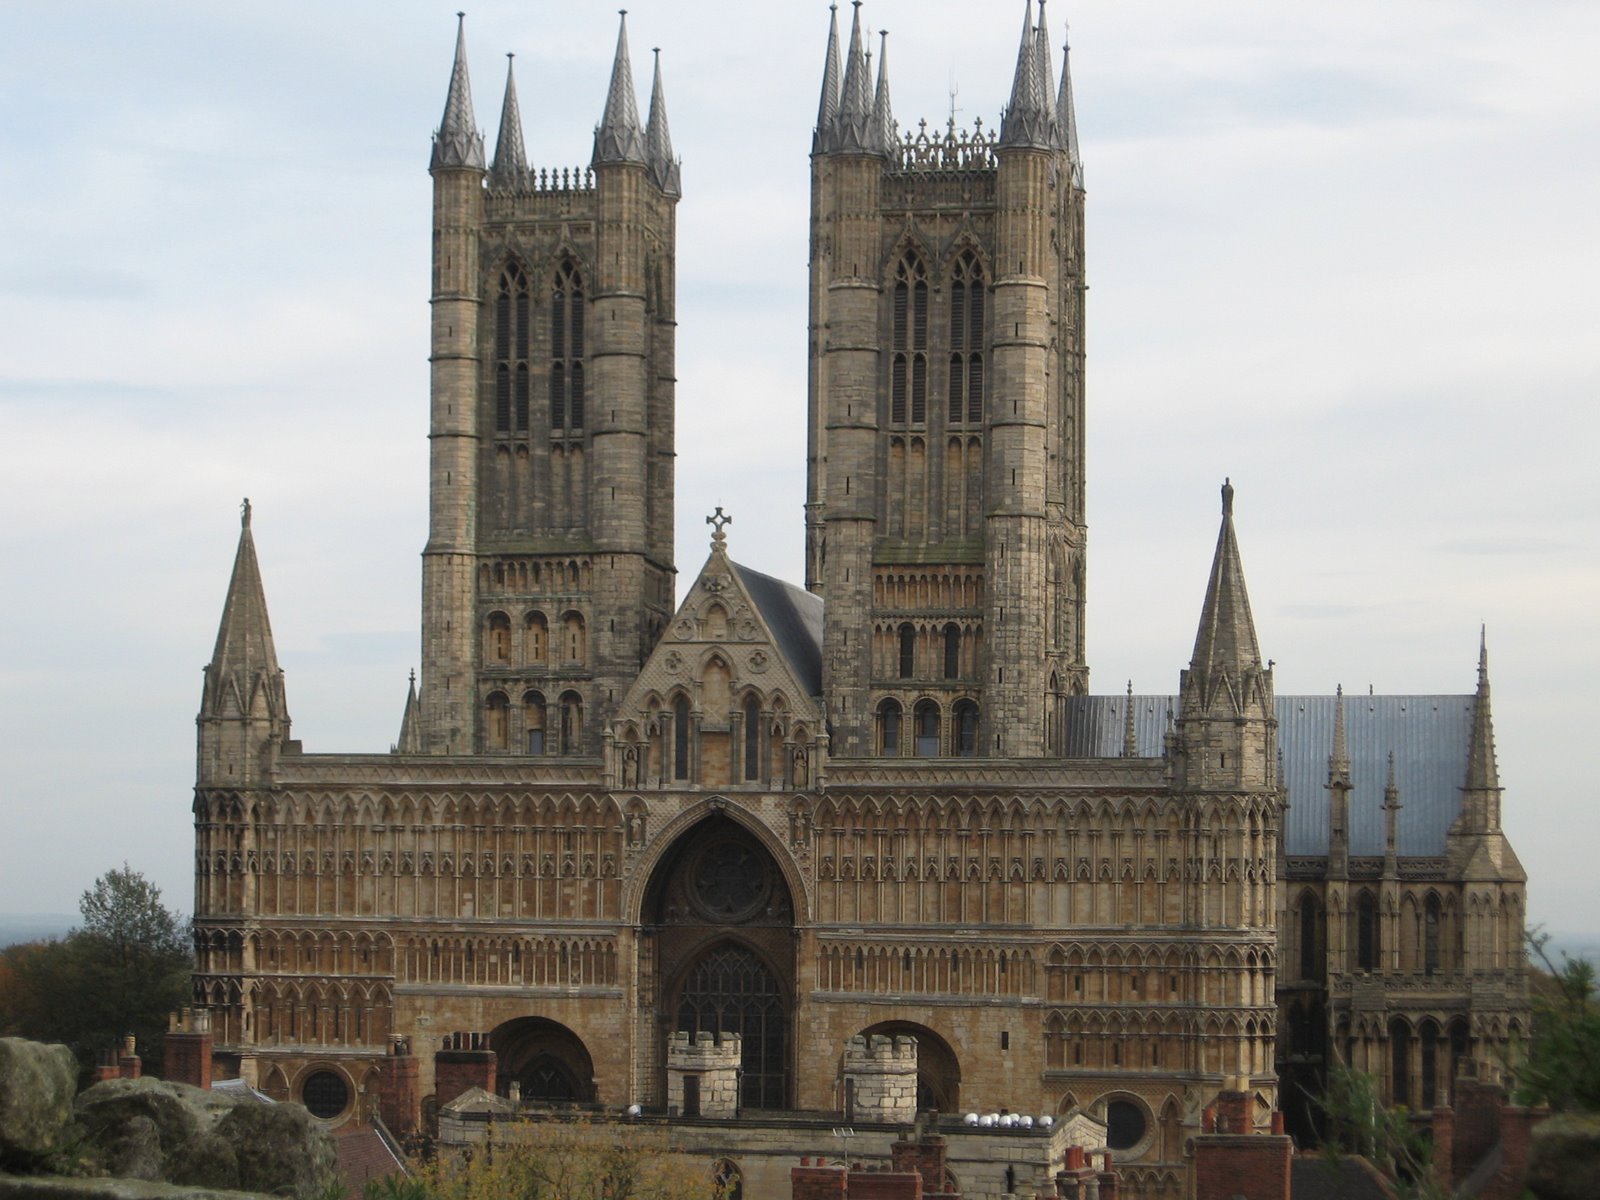 Researchers to discuss Knights Templar elements of Lincoln Cathedral in England | Aftermath News